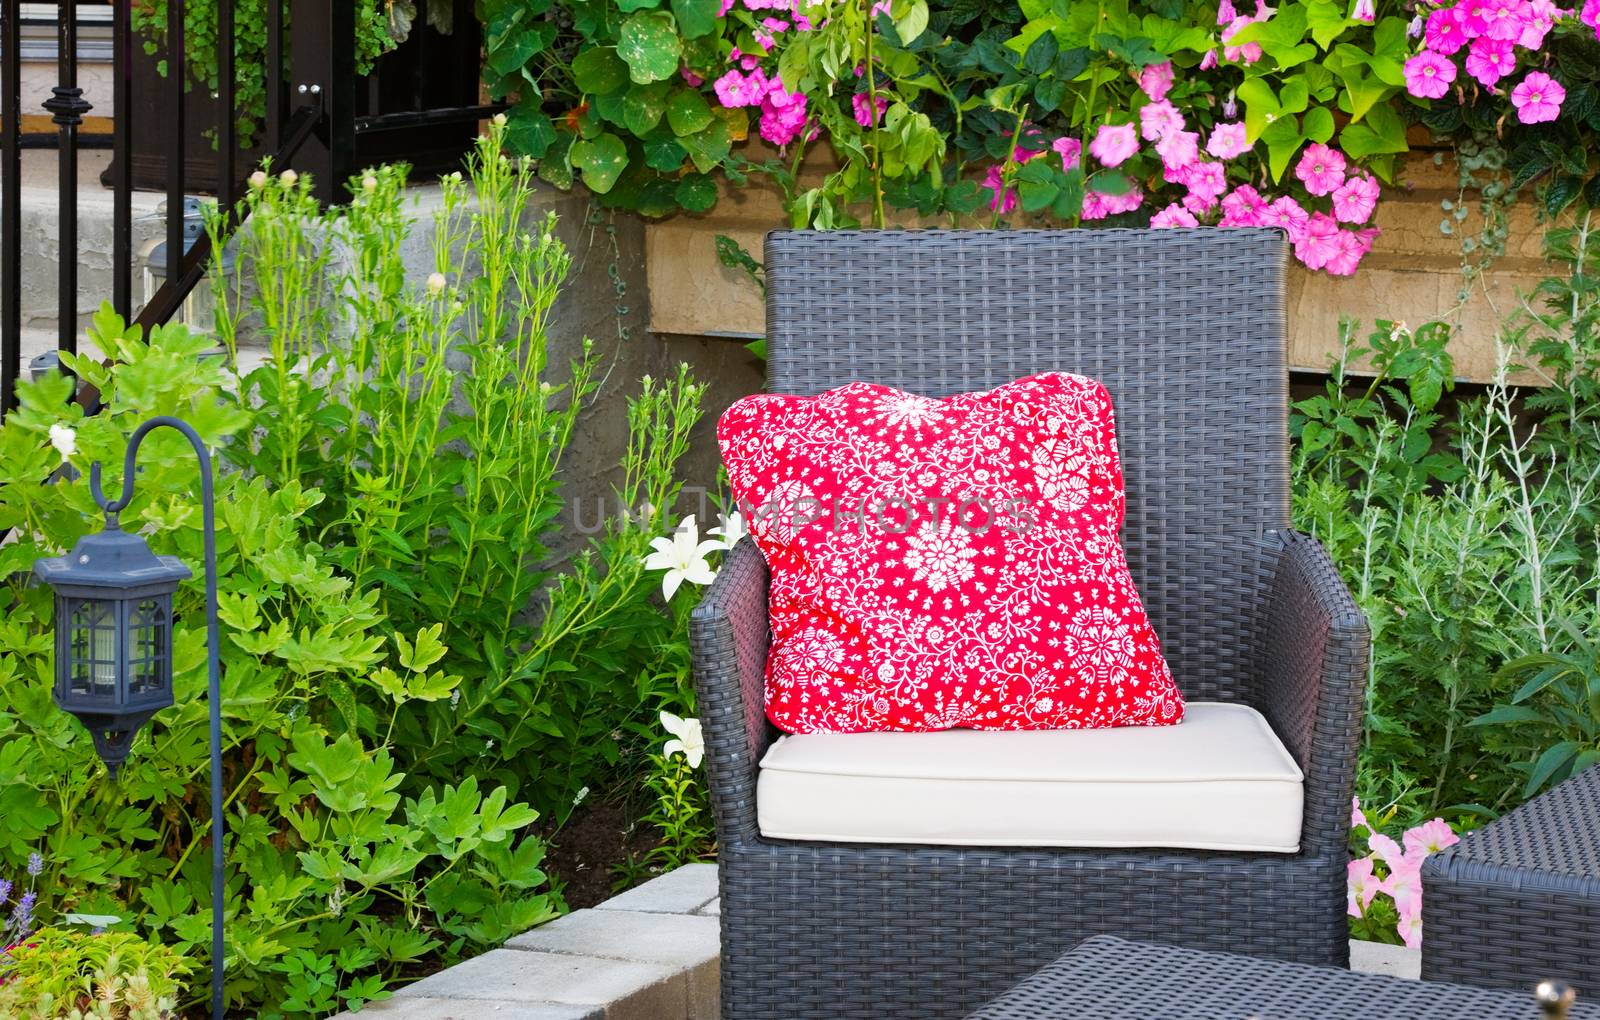 A peaceful resting spot in a beautiful garden retreat.  The perfect place to curl up and read.